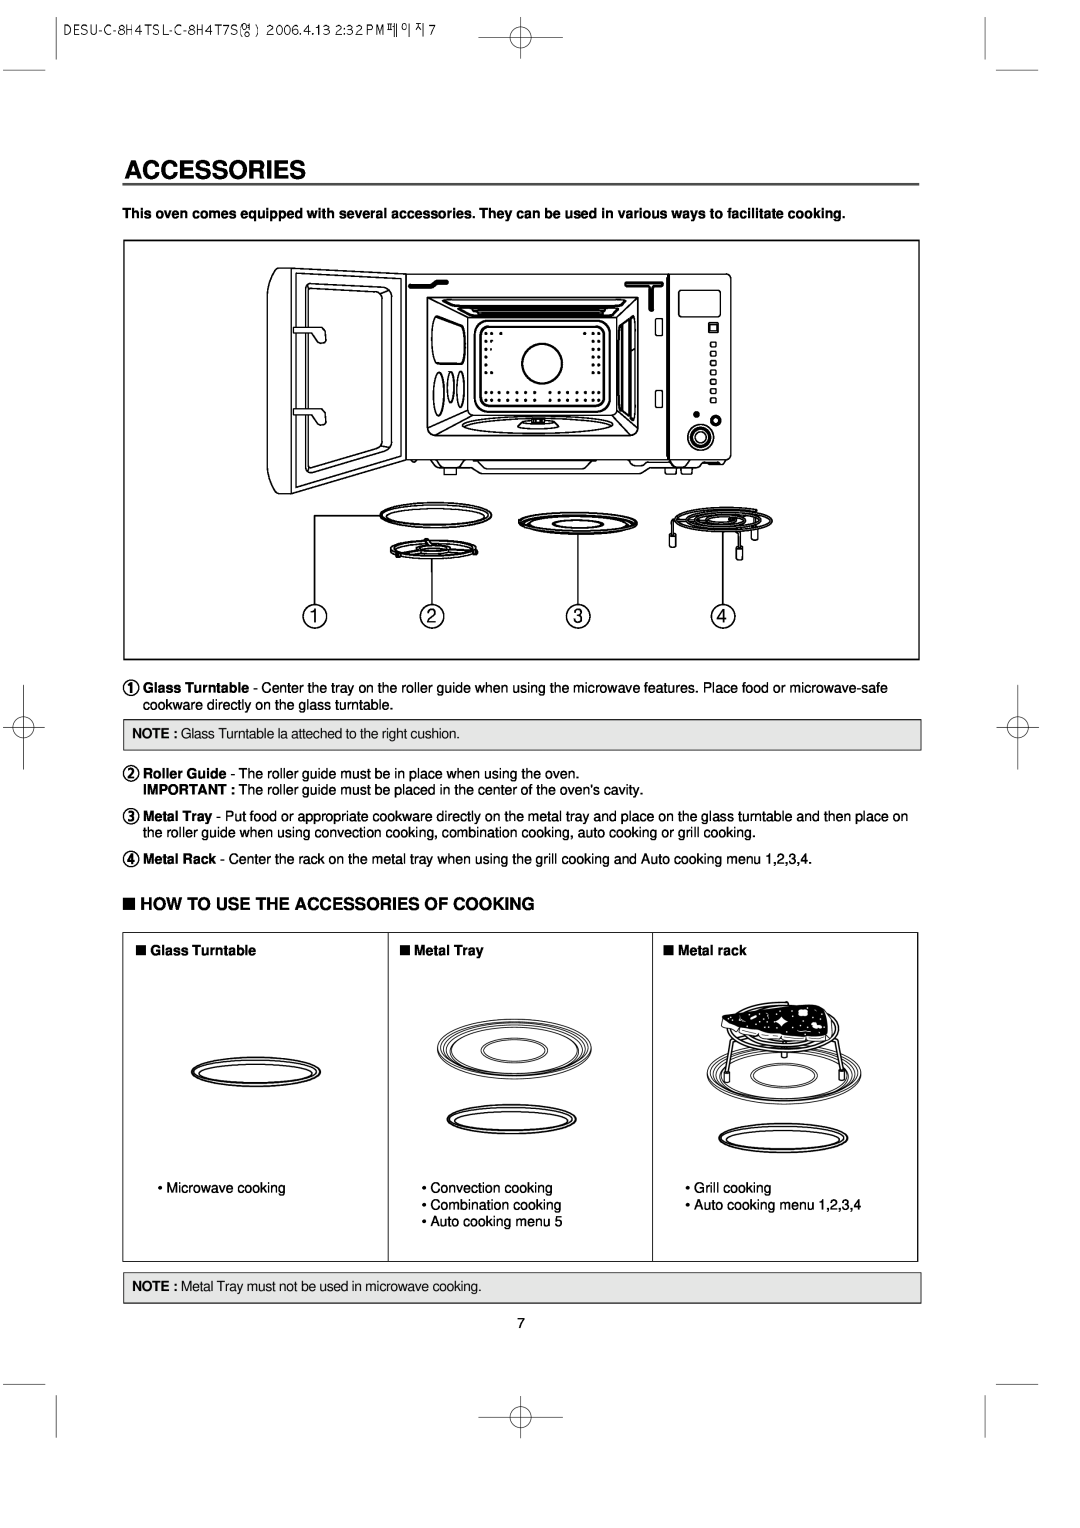 Daewoo KOC-8H4TSL owner manual How To Use The Accessories Of Cooking, Glass Turntable, Metal Tray, Metal rack 